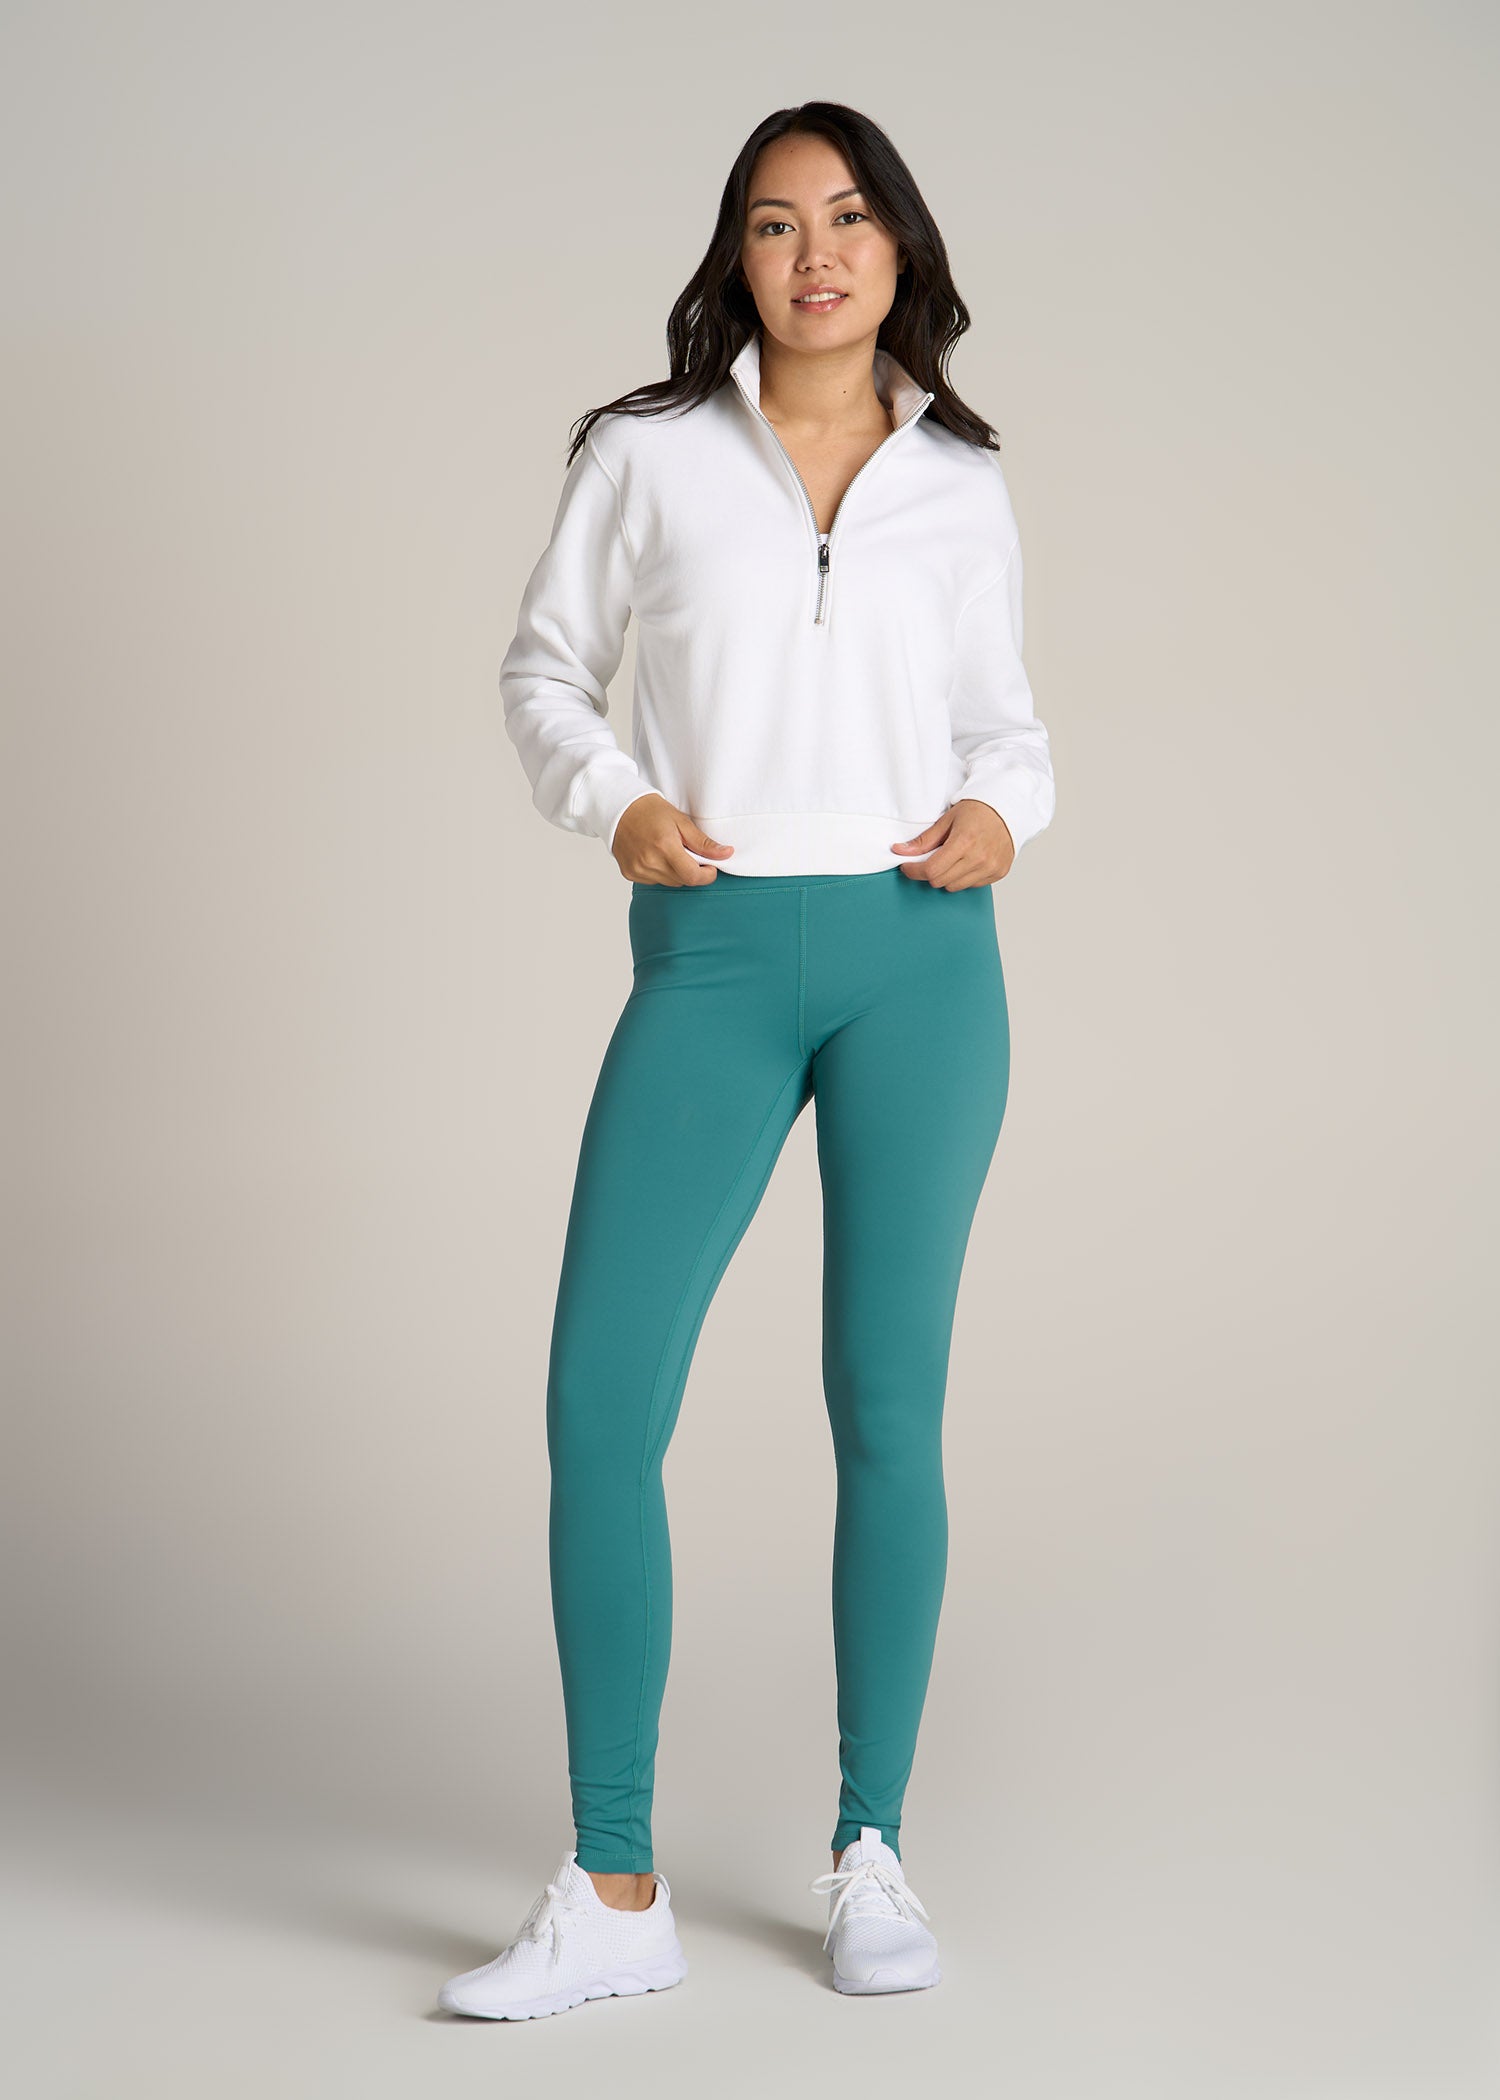 Buy The Latest High Waisted Jeans Pants For Women – La Patricia Fashion